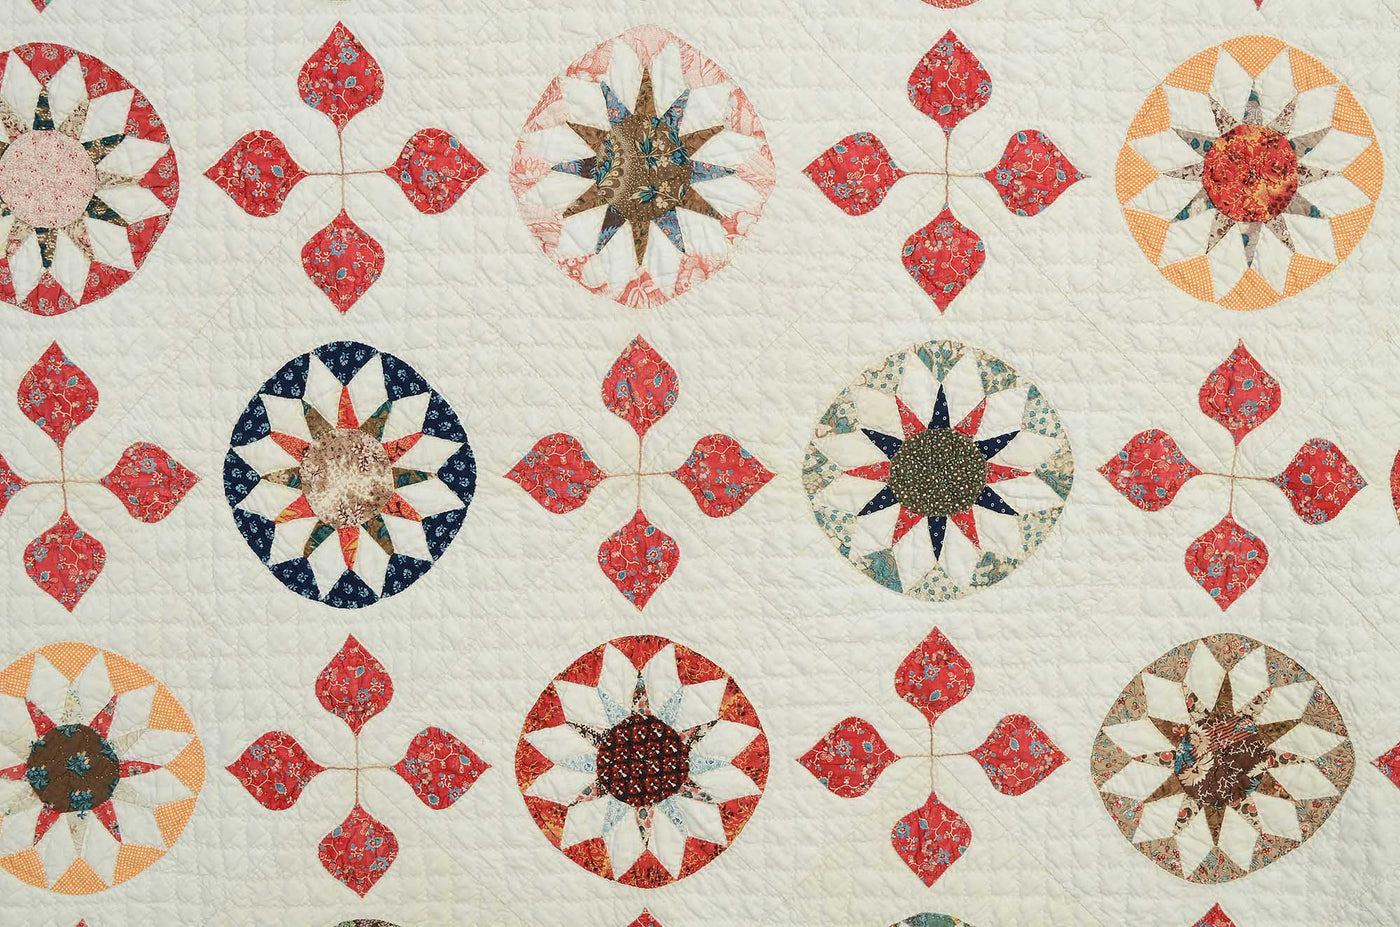 rising-sun-and-hearts-quilt-1453402-detail-2